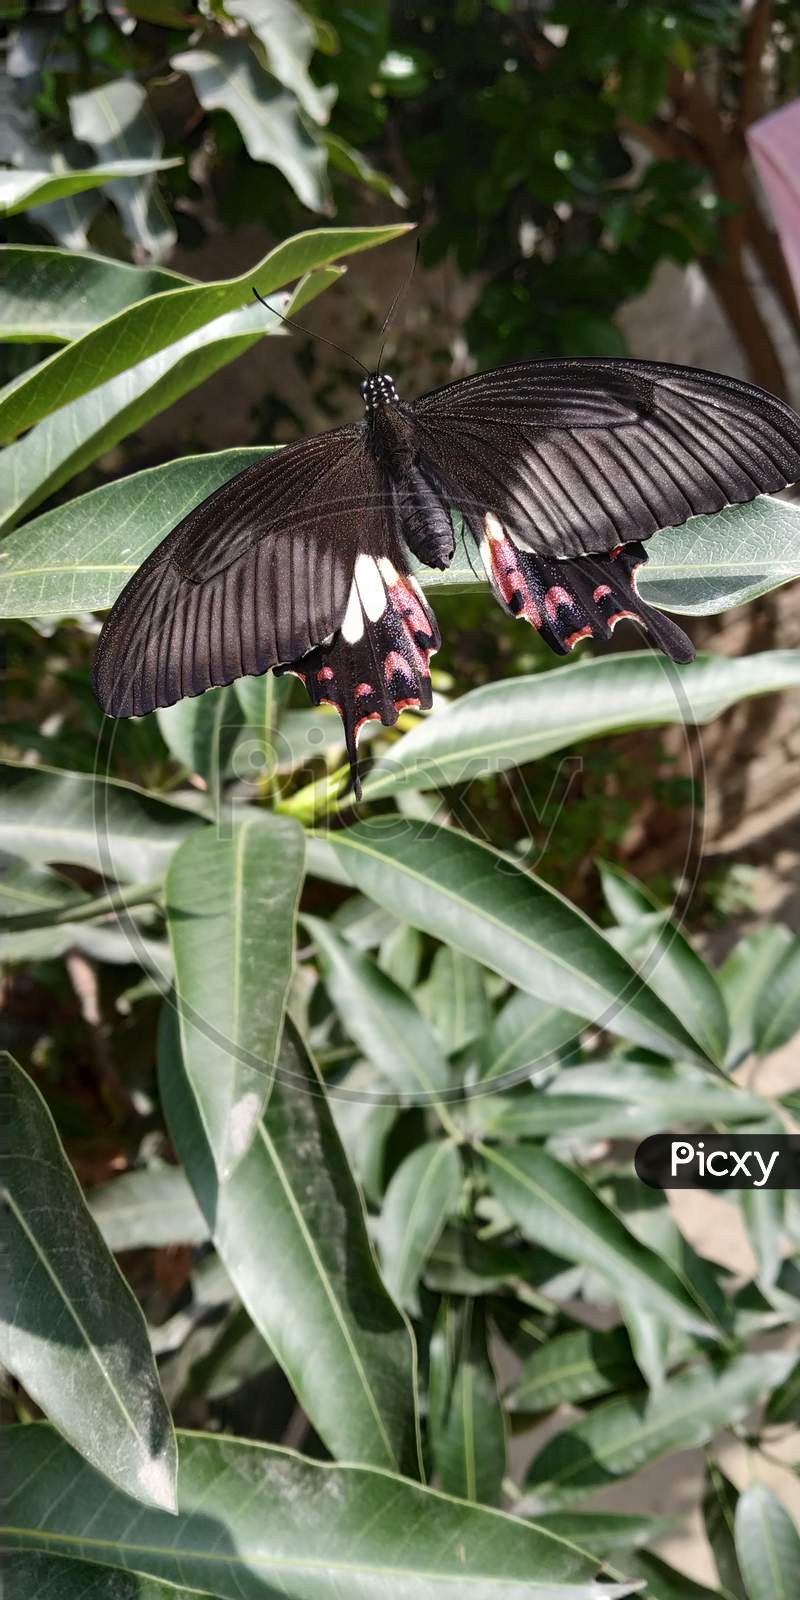 Image of a Beautiful black butterfly